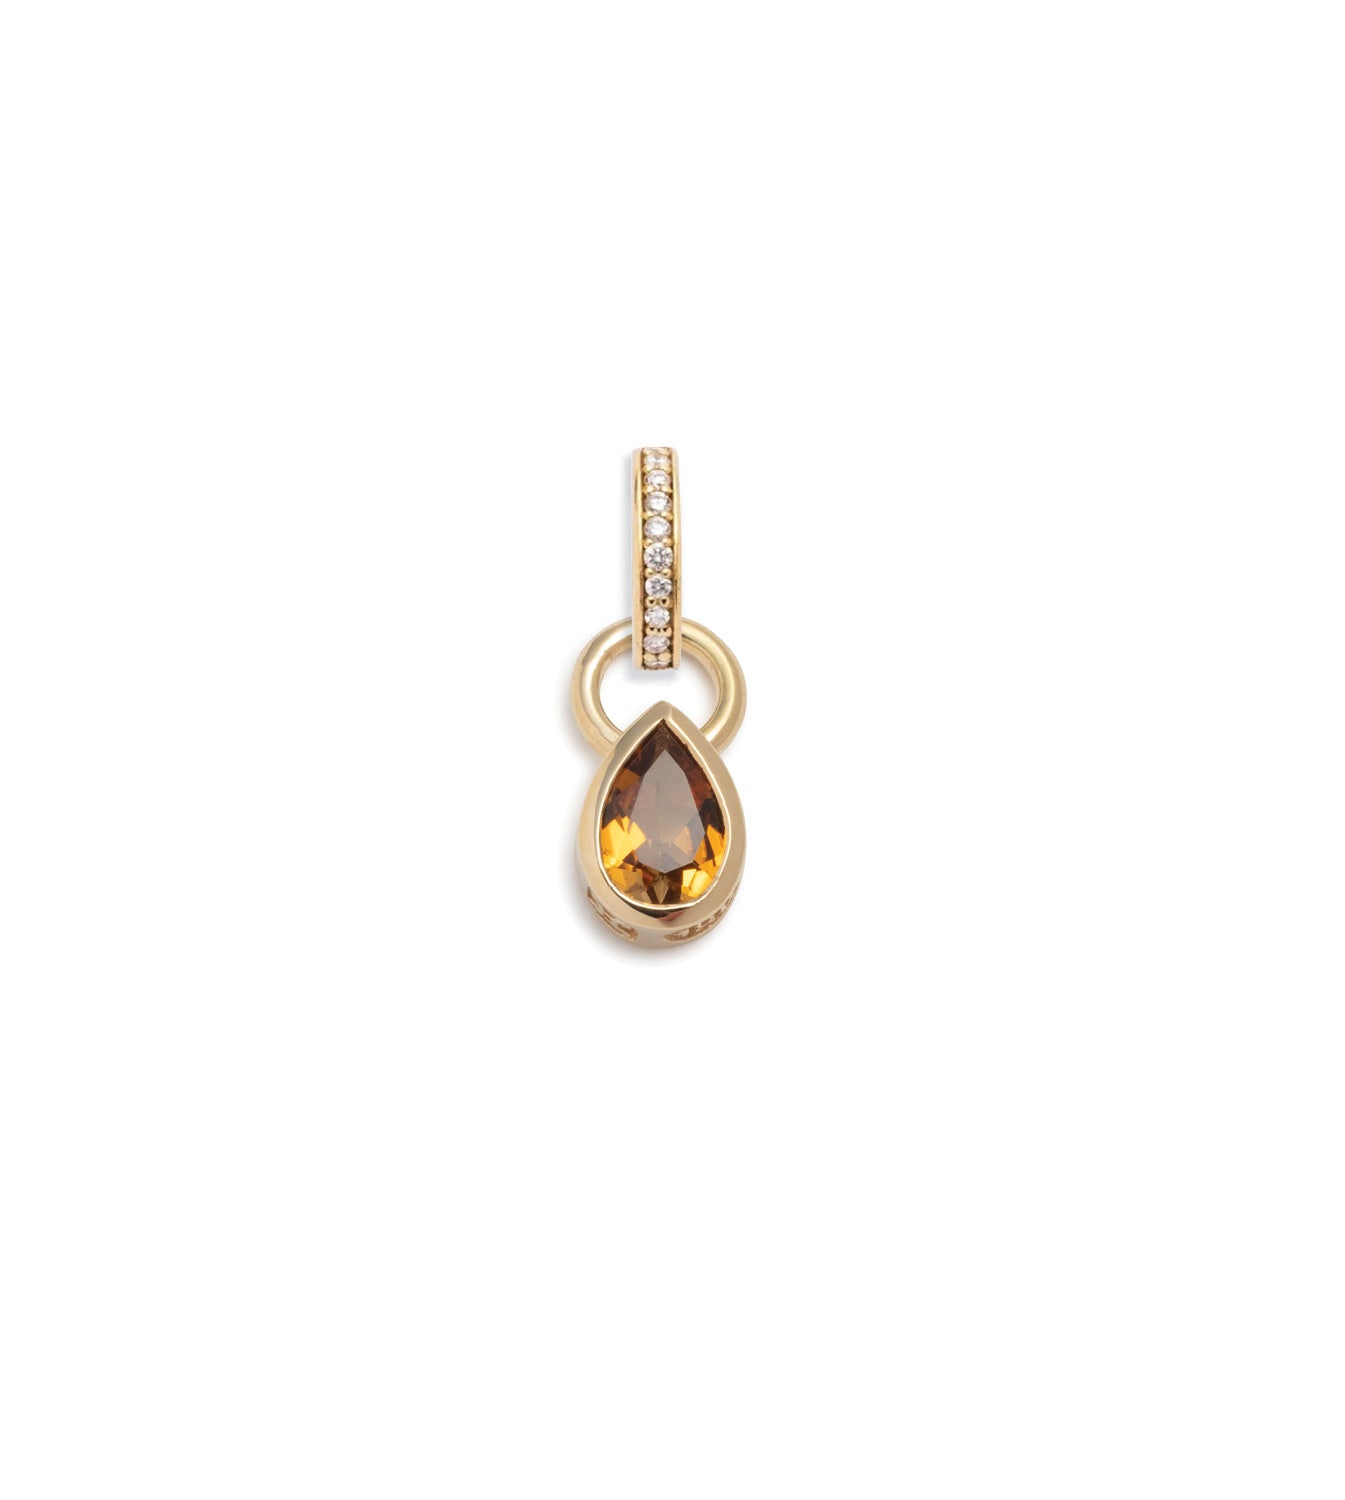 Forever & Always a Pair - Love : 0.85ct Yellow Citrine Pear Pendant with Oval Push Gate